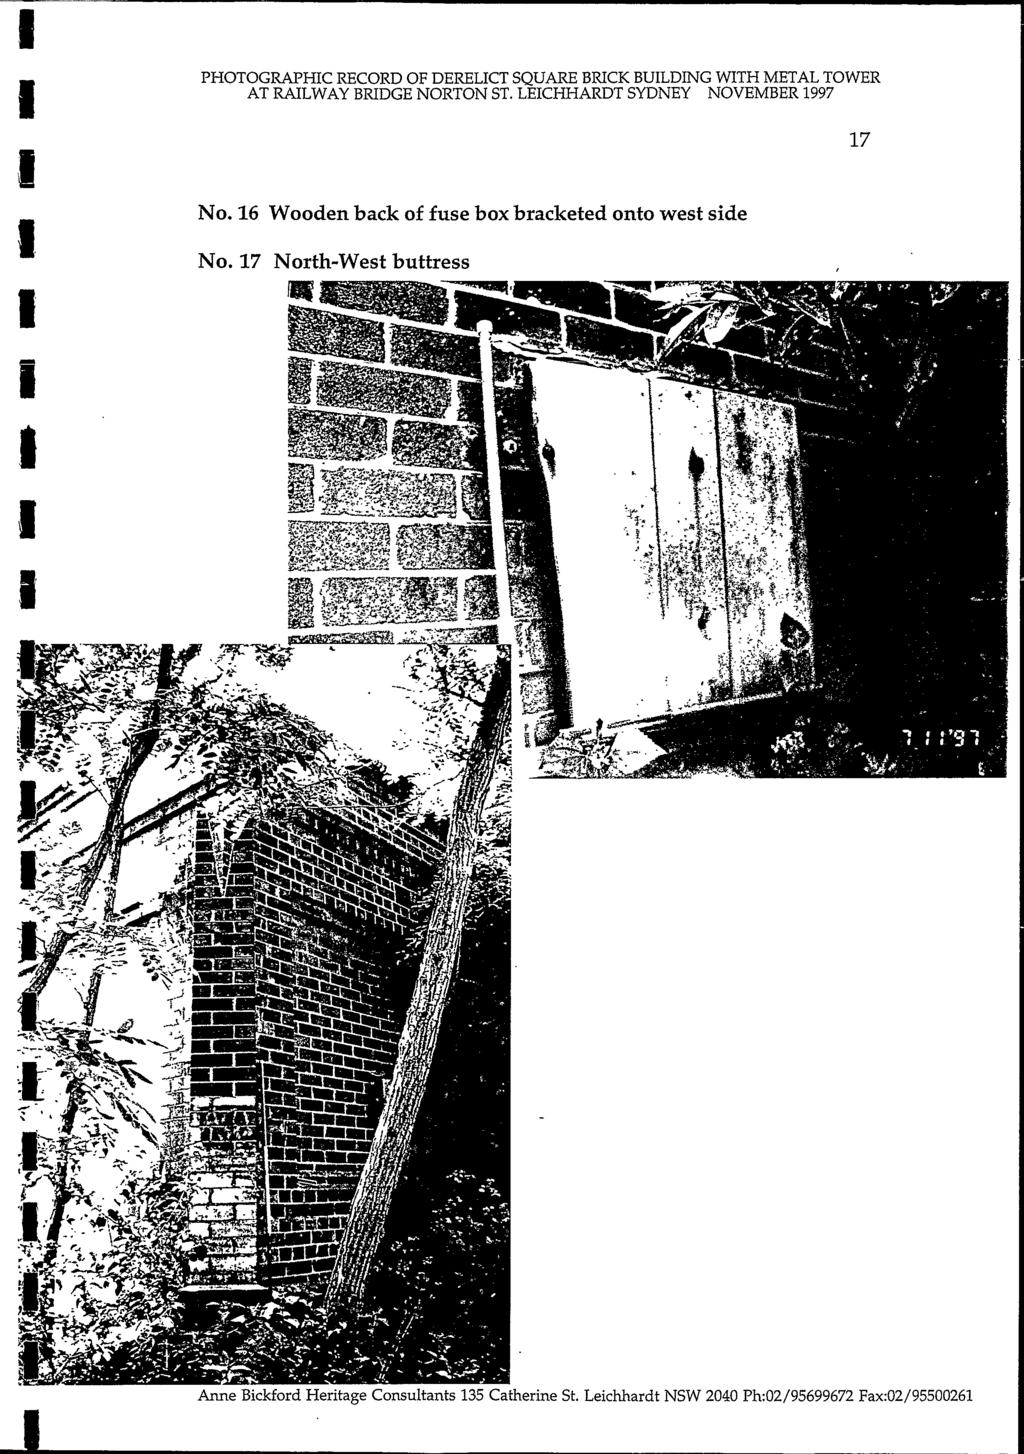 . PHOTOGRAPHC RECORD OF DERELCT SQUARE BRCK BULDNG WTH METAL TOWER AT RALWAY BRDGE NORTON ST.